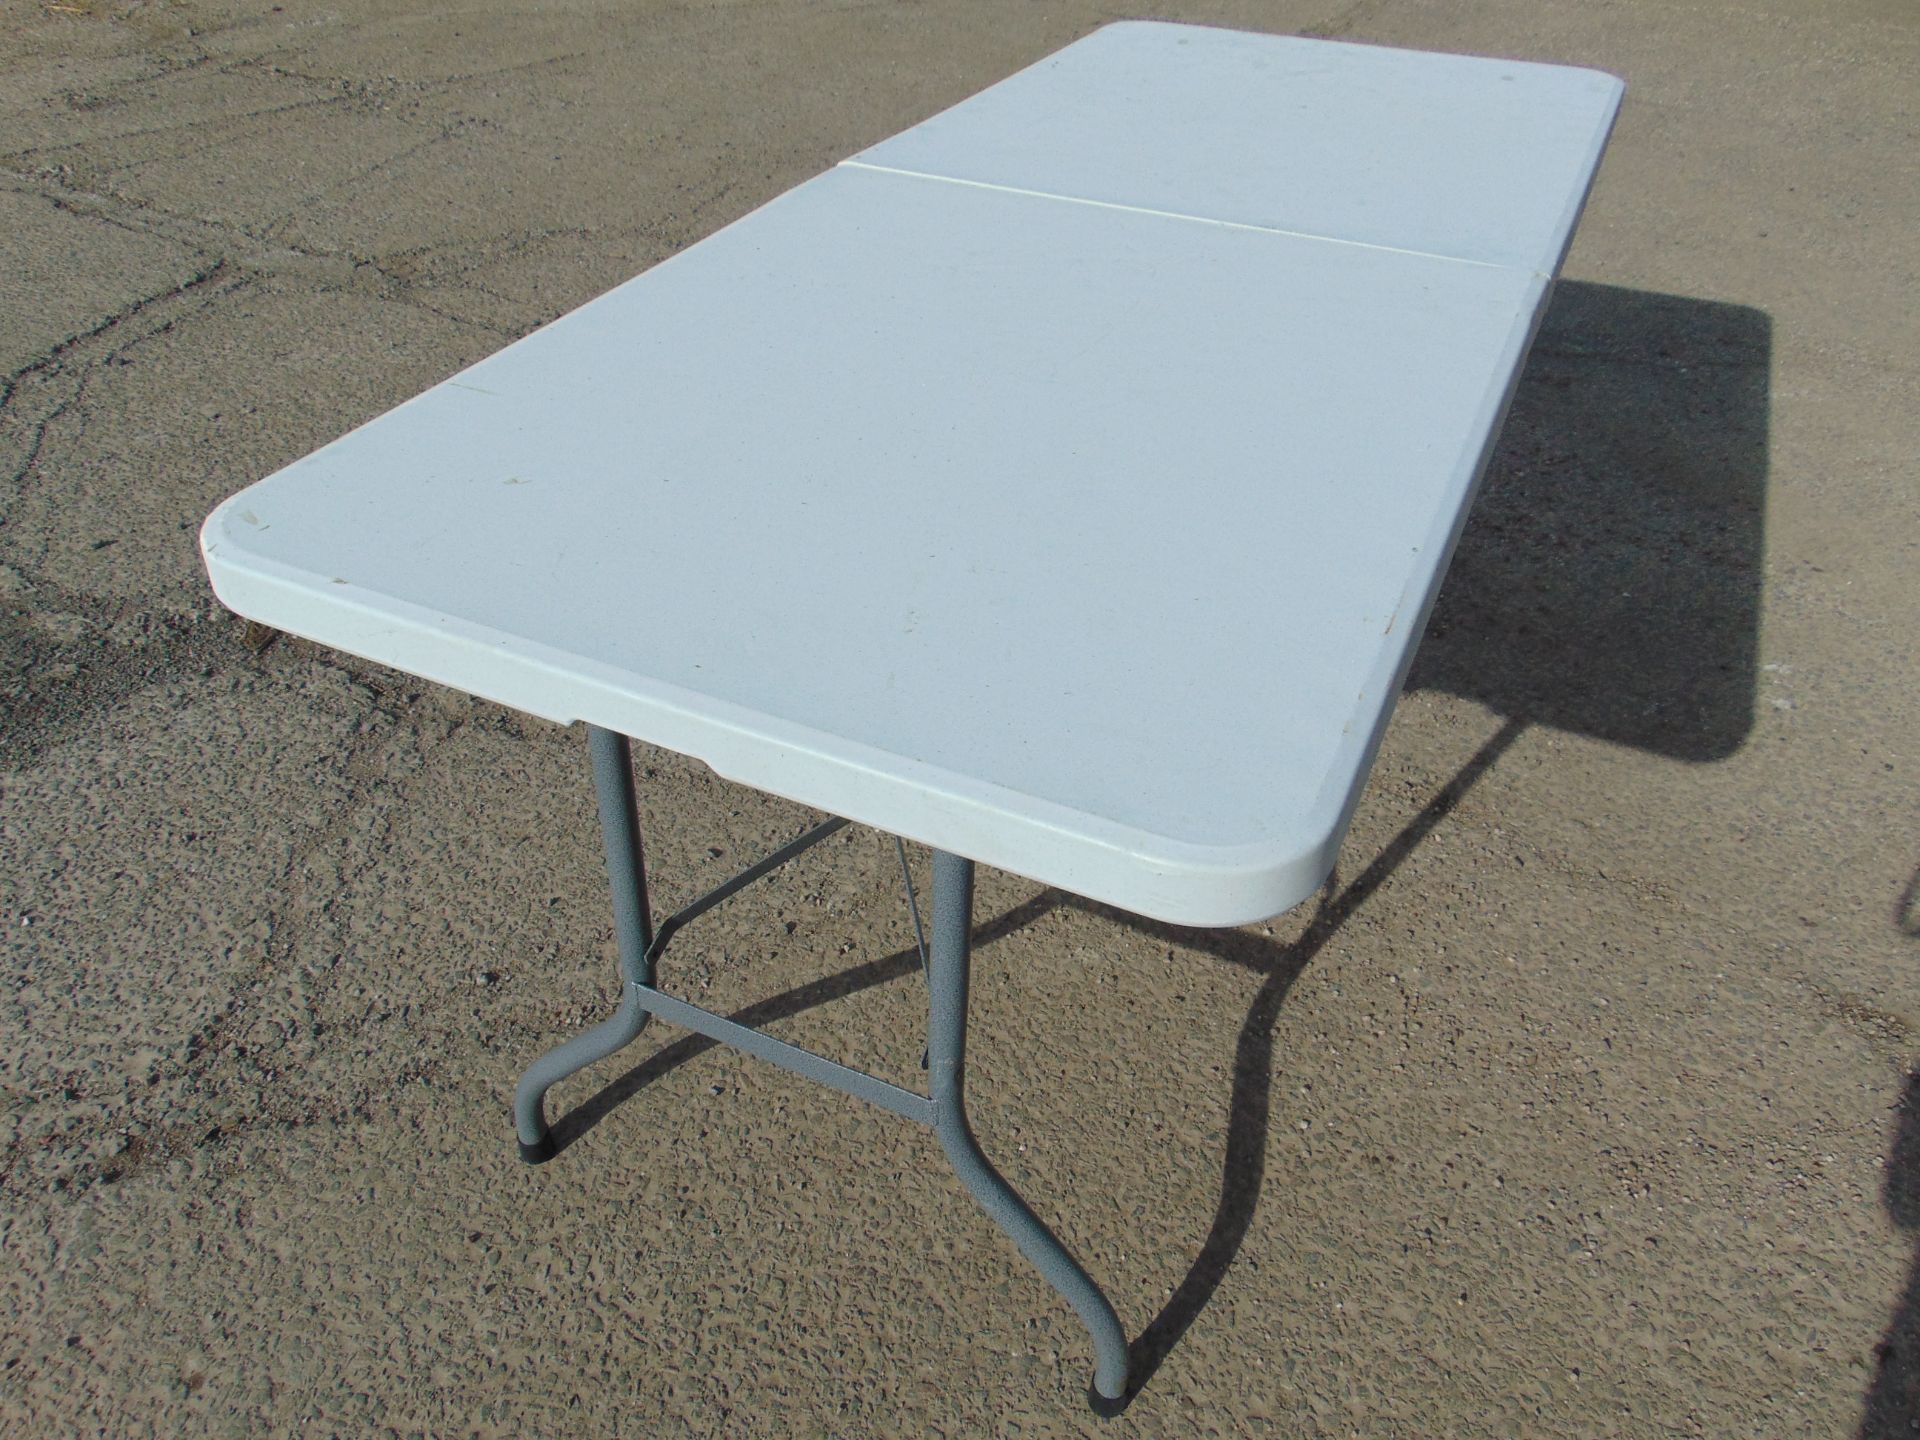 6ft Foldable Carry Camp Table - Image 2 of 6